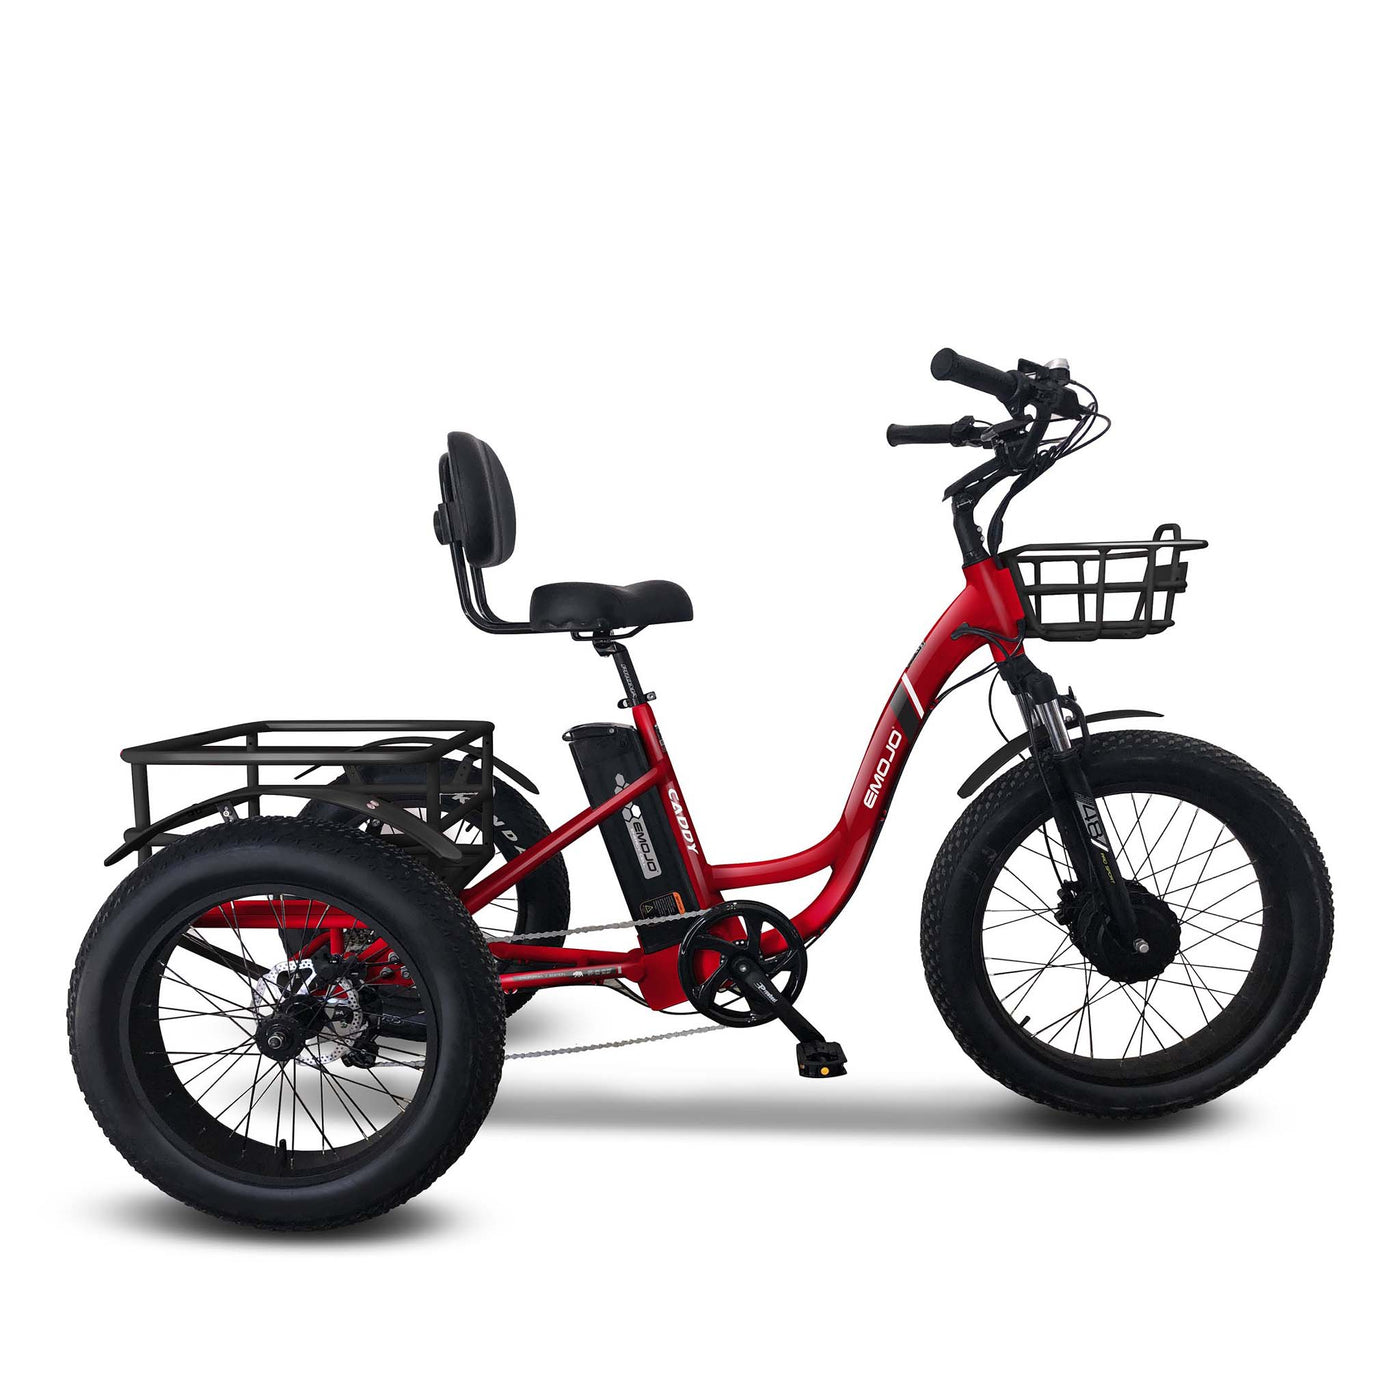 Emojo Caddy Pro best selling Red Step through fat tire comfortable safe all-terrain Electric Bike Electric Trike